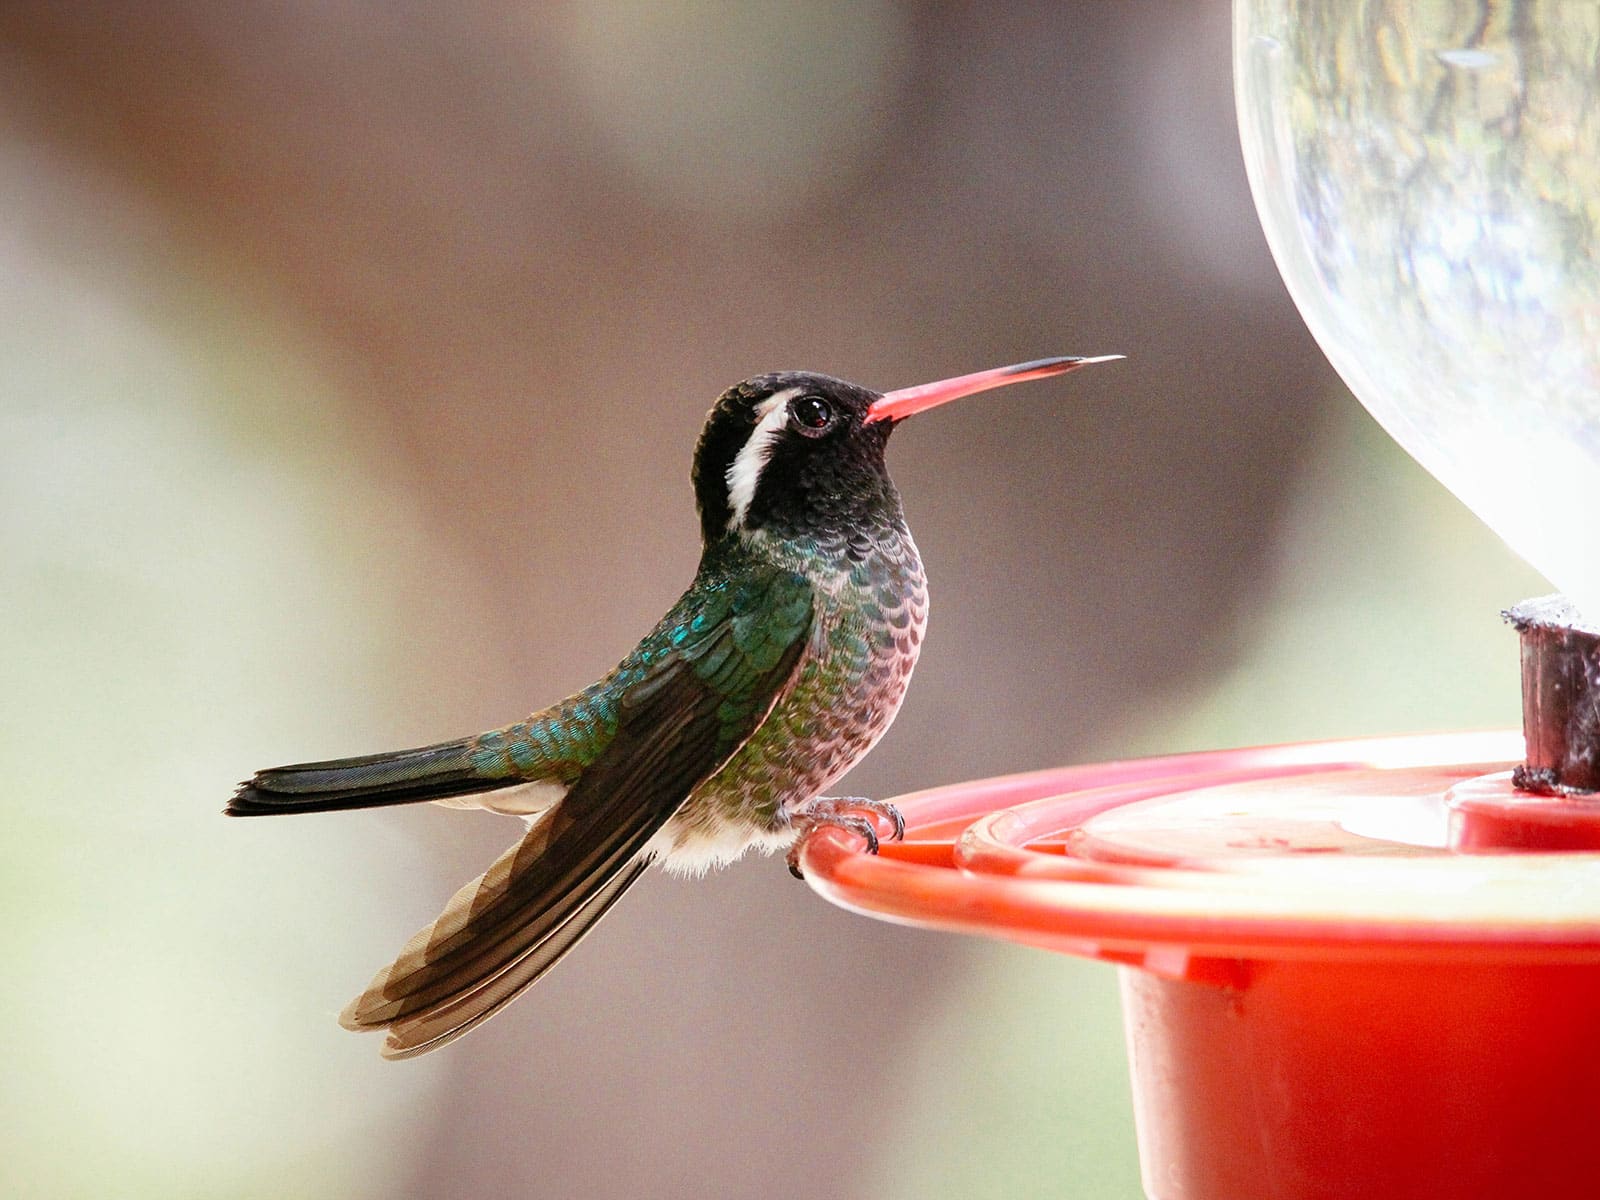 White-eared hummingbird standing on a red feeder